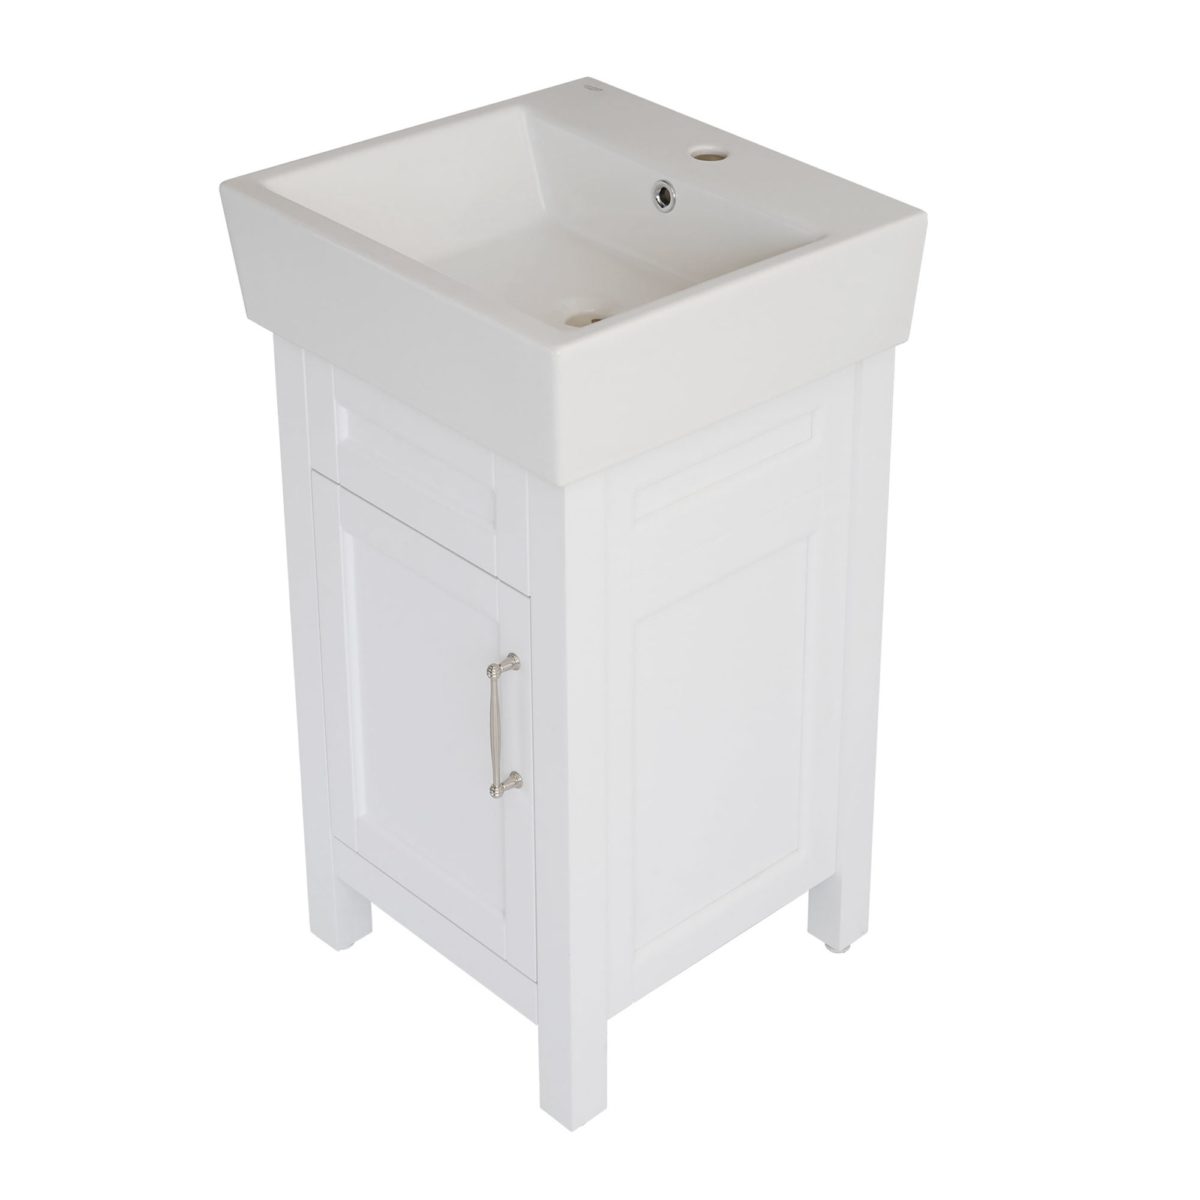 18 inch white vanity side to view a